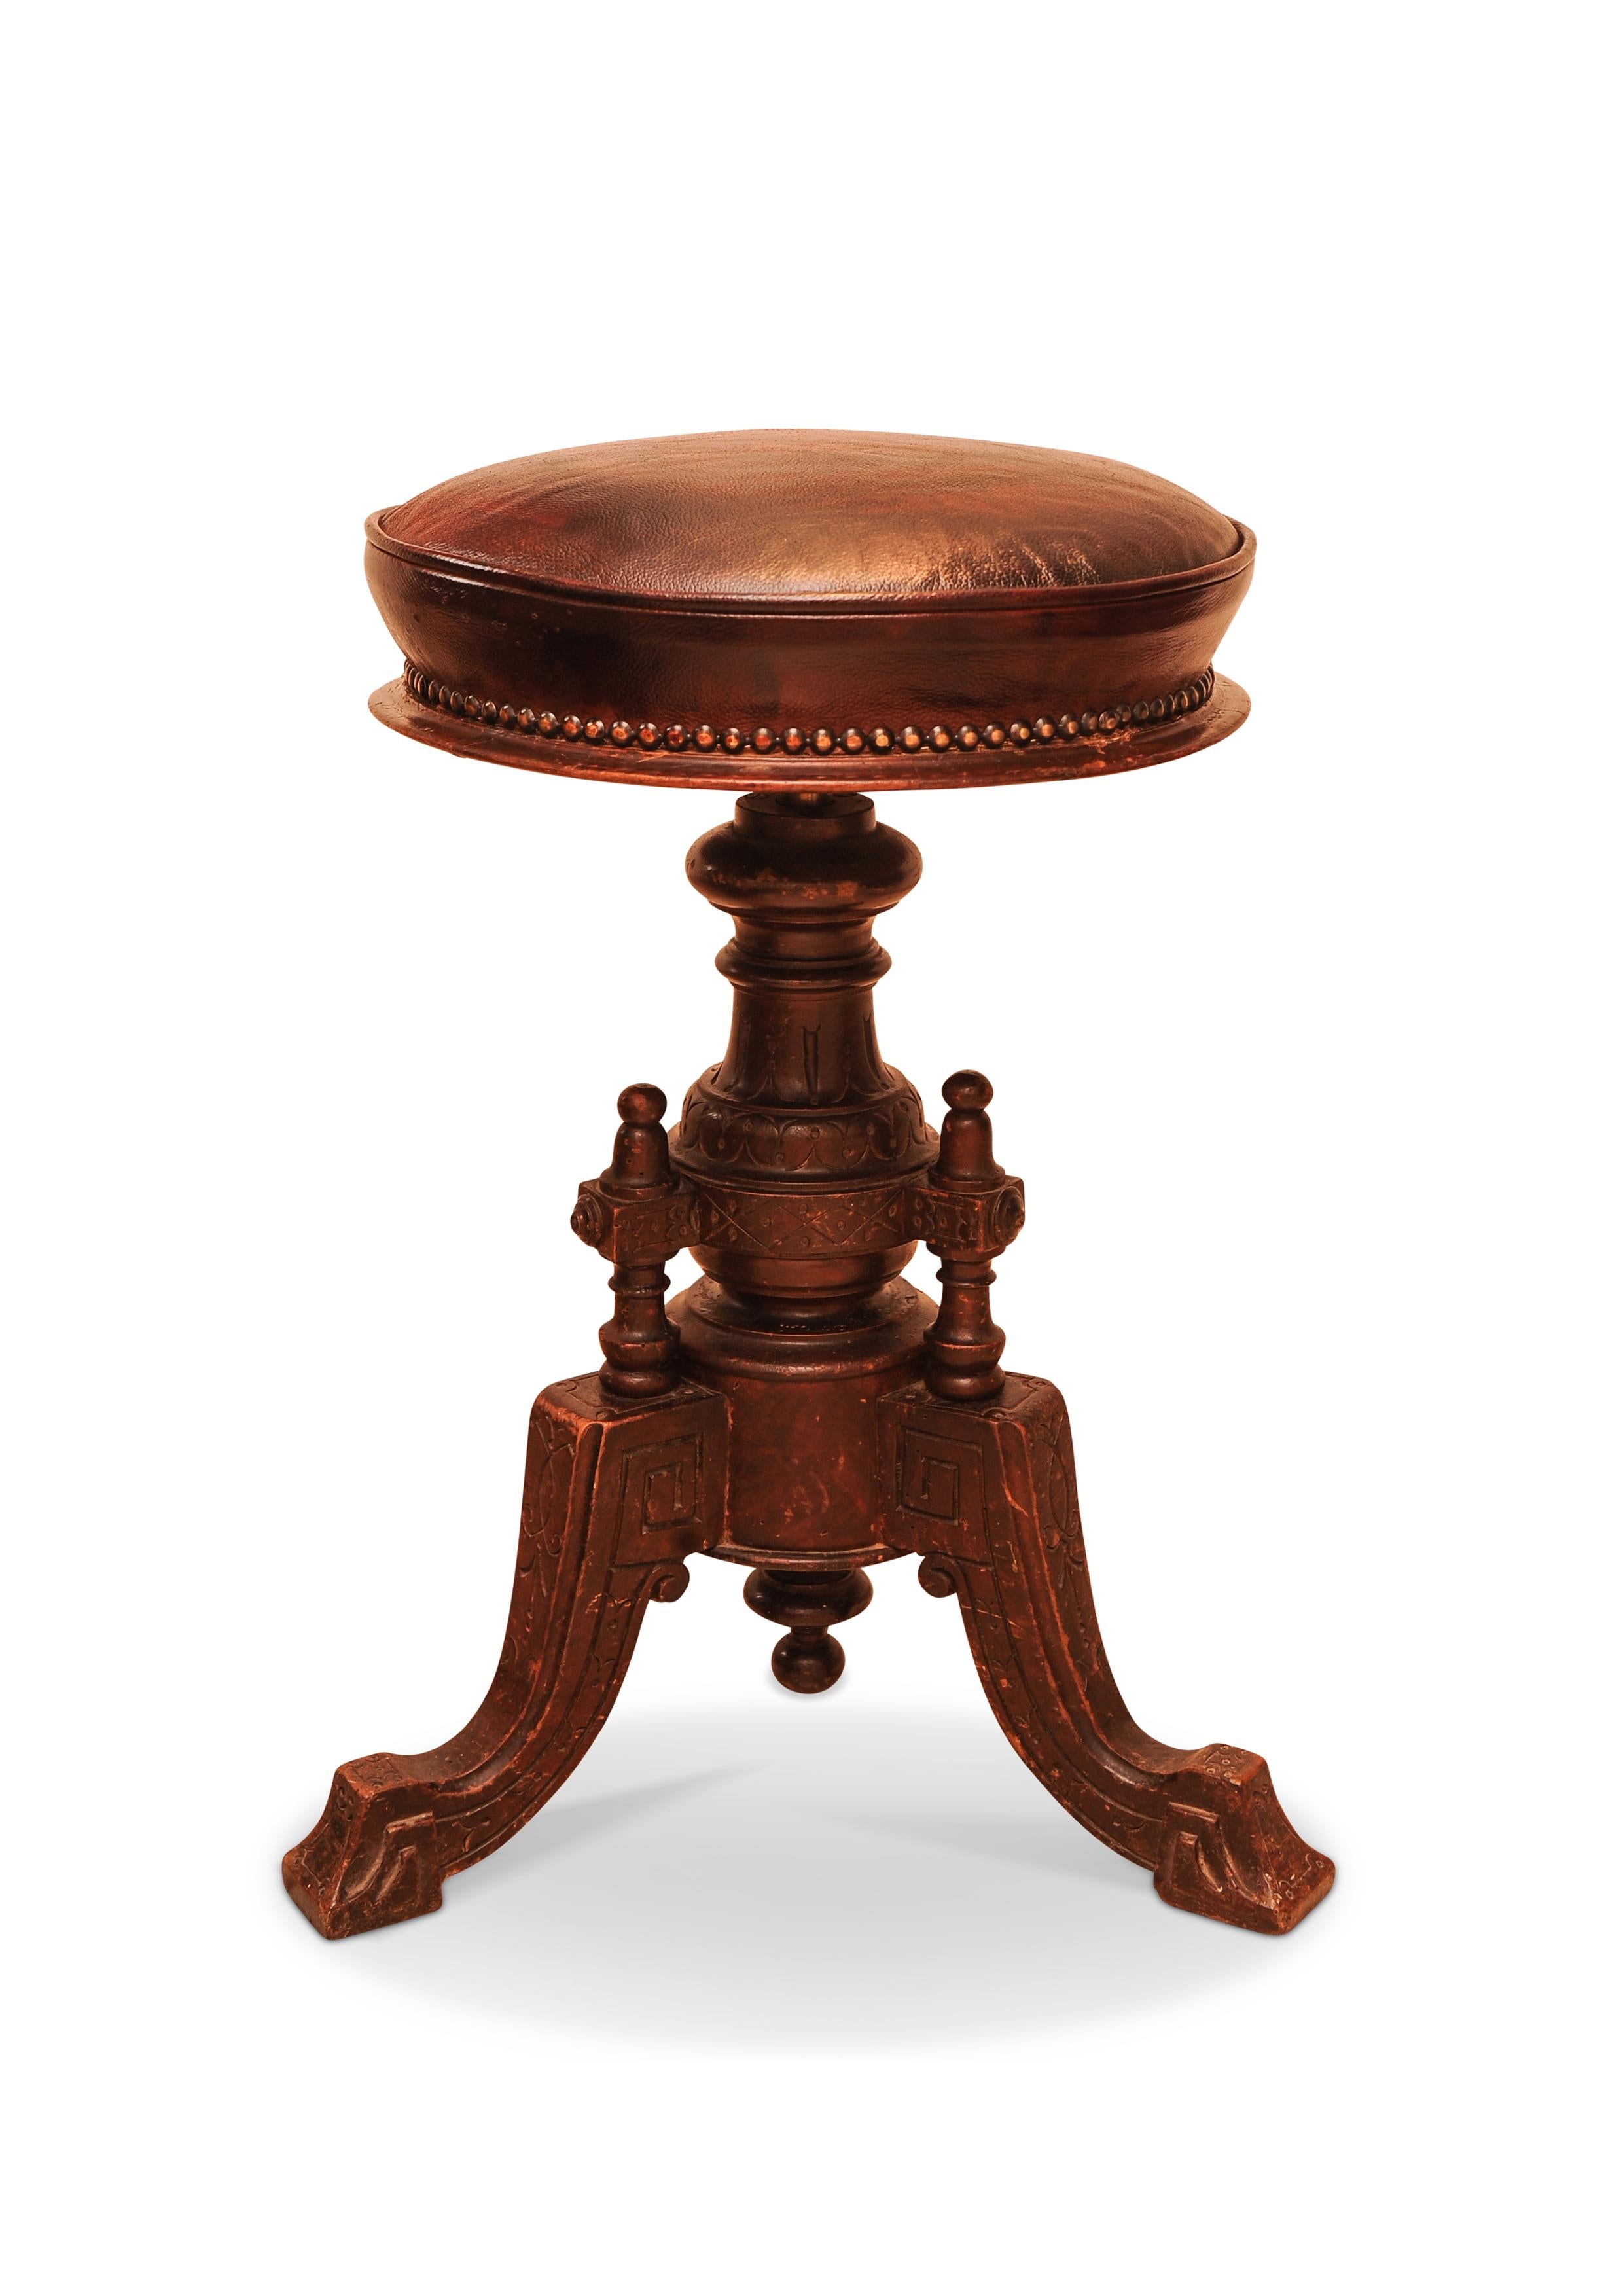 High Victorian Victorian Carved Wood Revolving Piano Stool With Brown Leather Seat Brass Studs For Sale